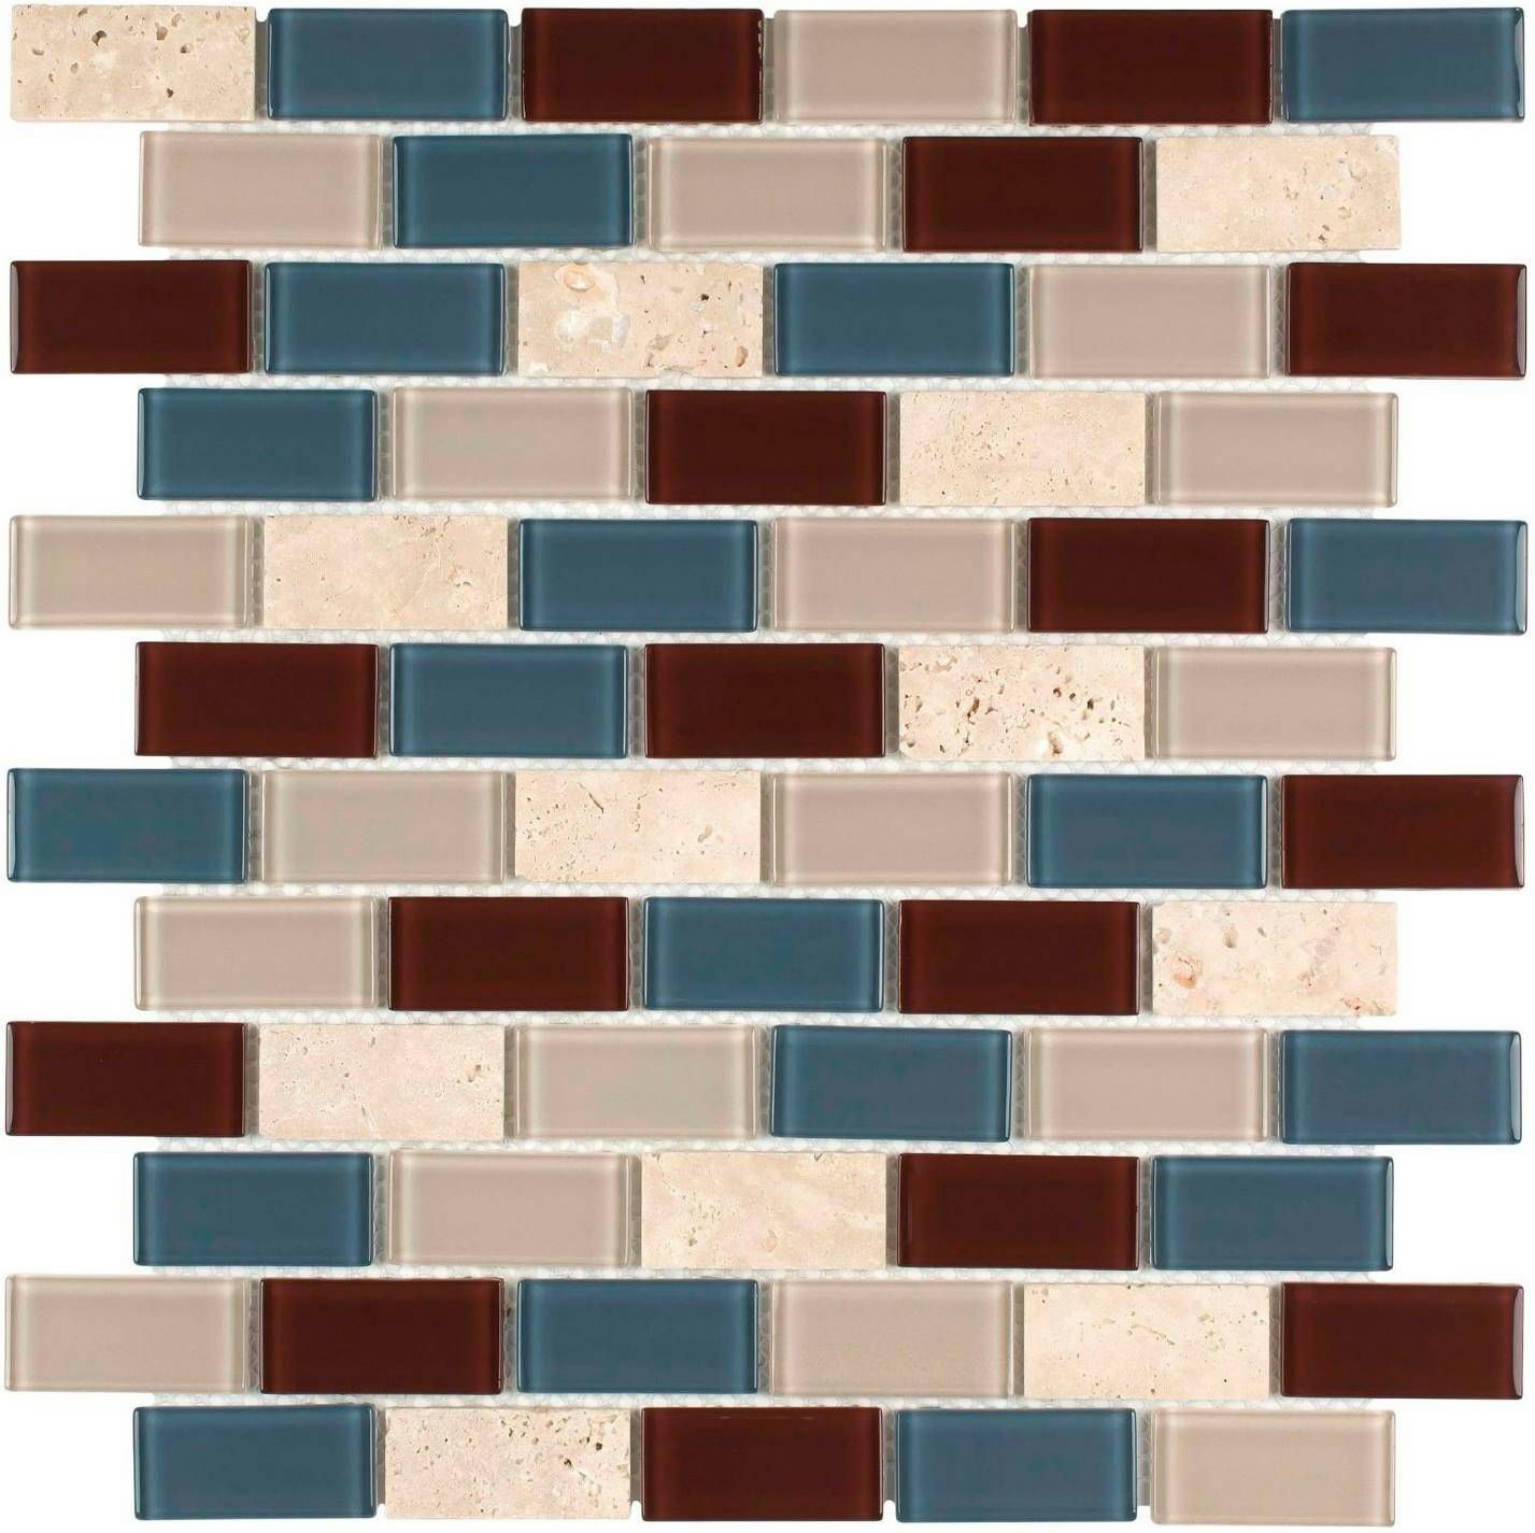 HLH4003 | Stones & More | Finest selection of Mosaics, Glass, Tile and Stone